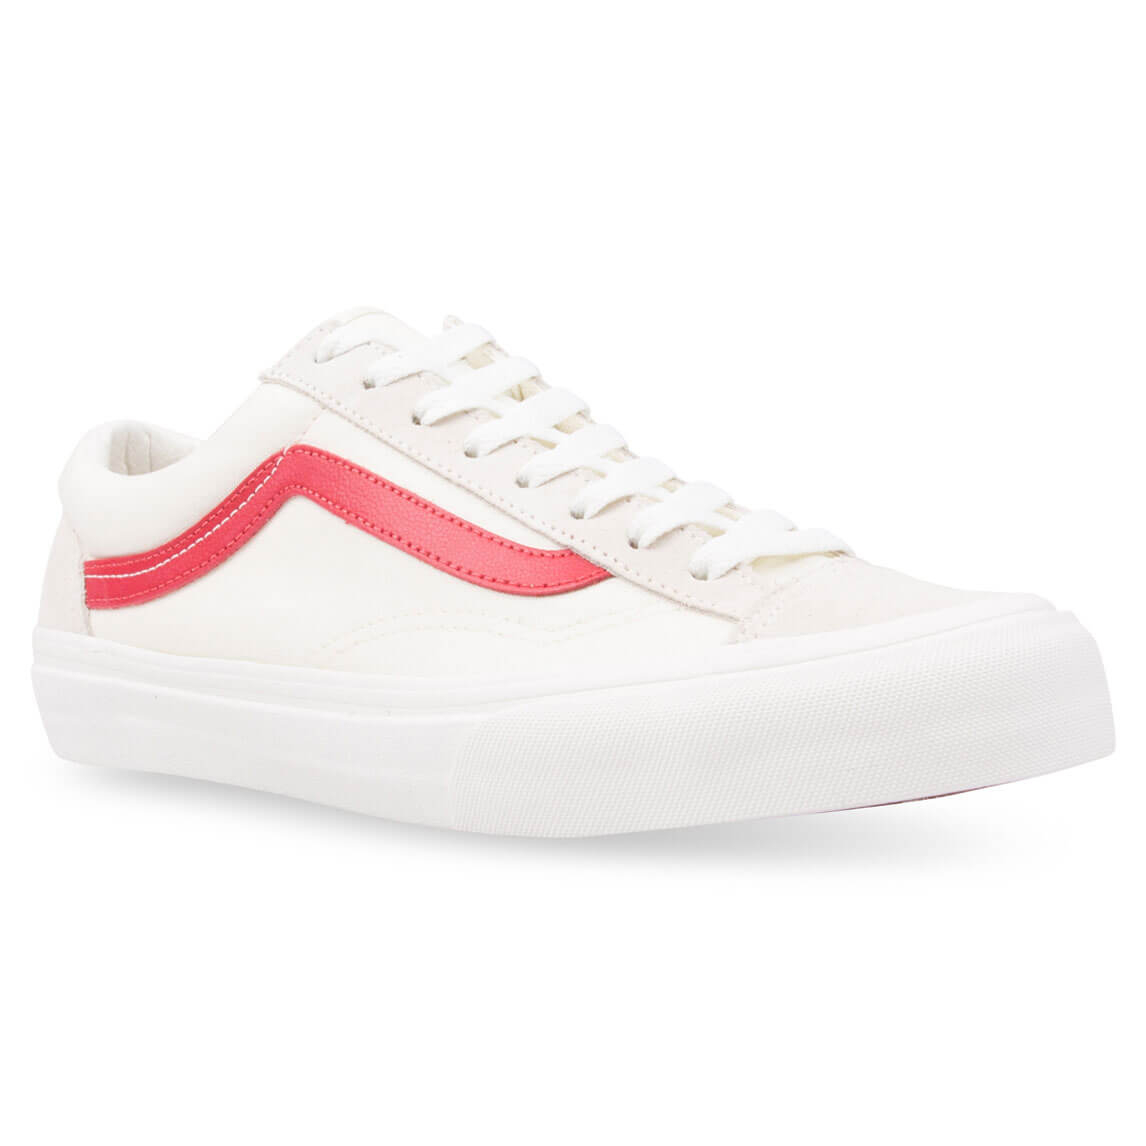 Vans STYLE 36 Marshmallow/Red | Hype DC